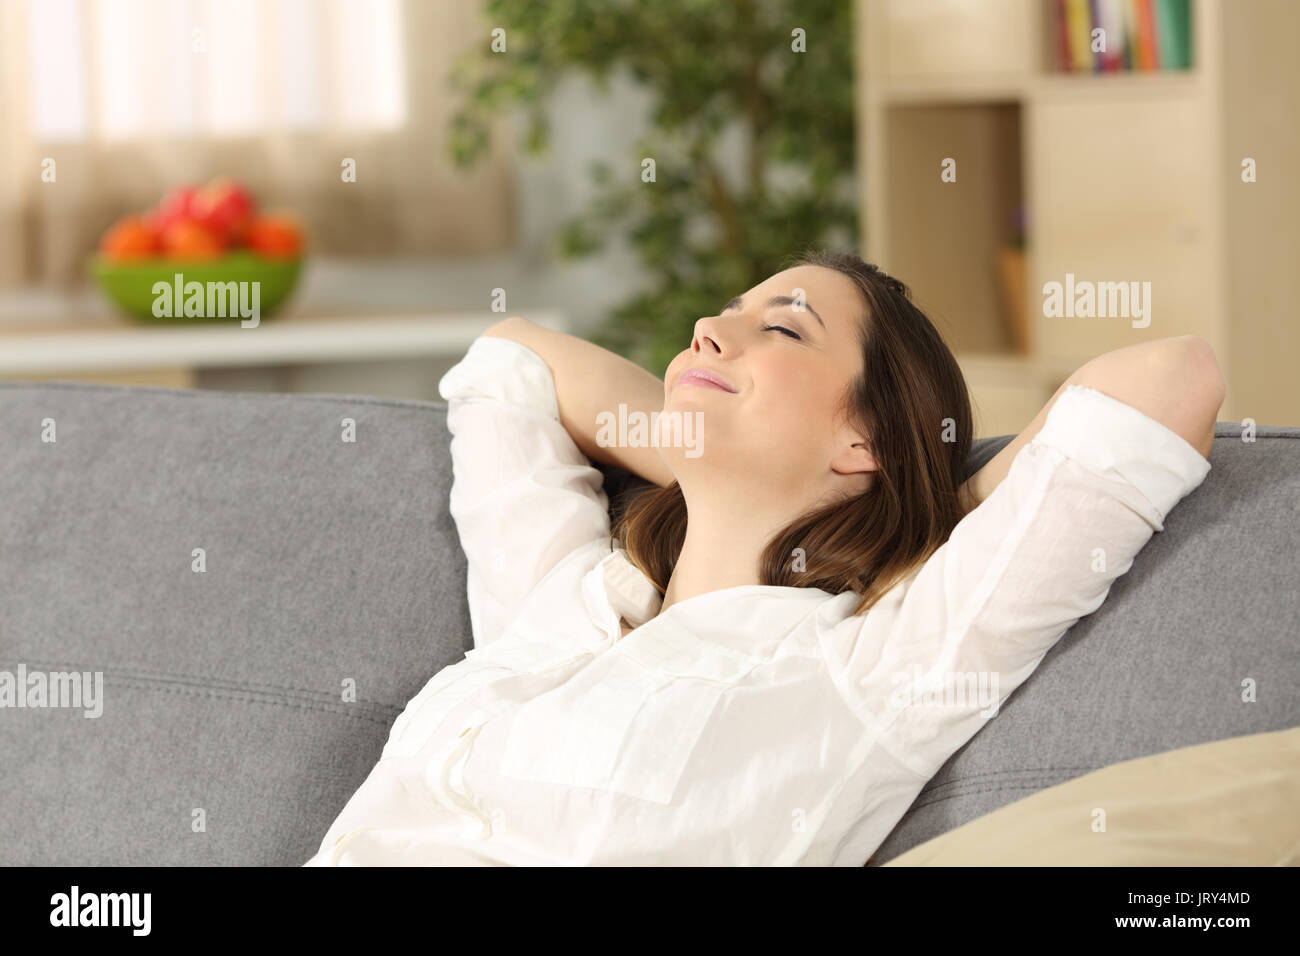 Happy homeowner relaxing alone sitting on a couch at home Stock Photo